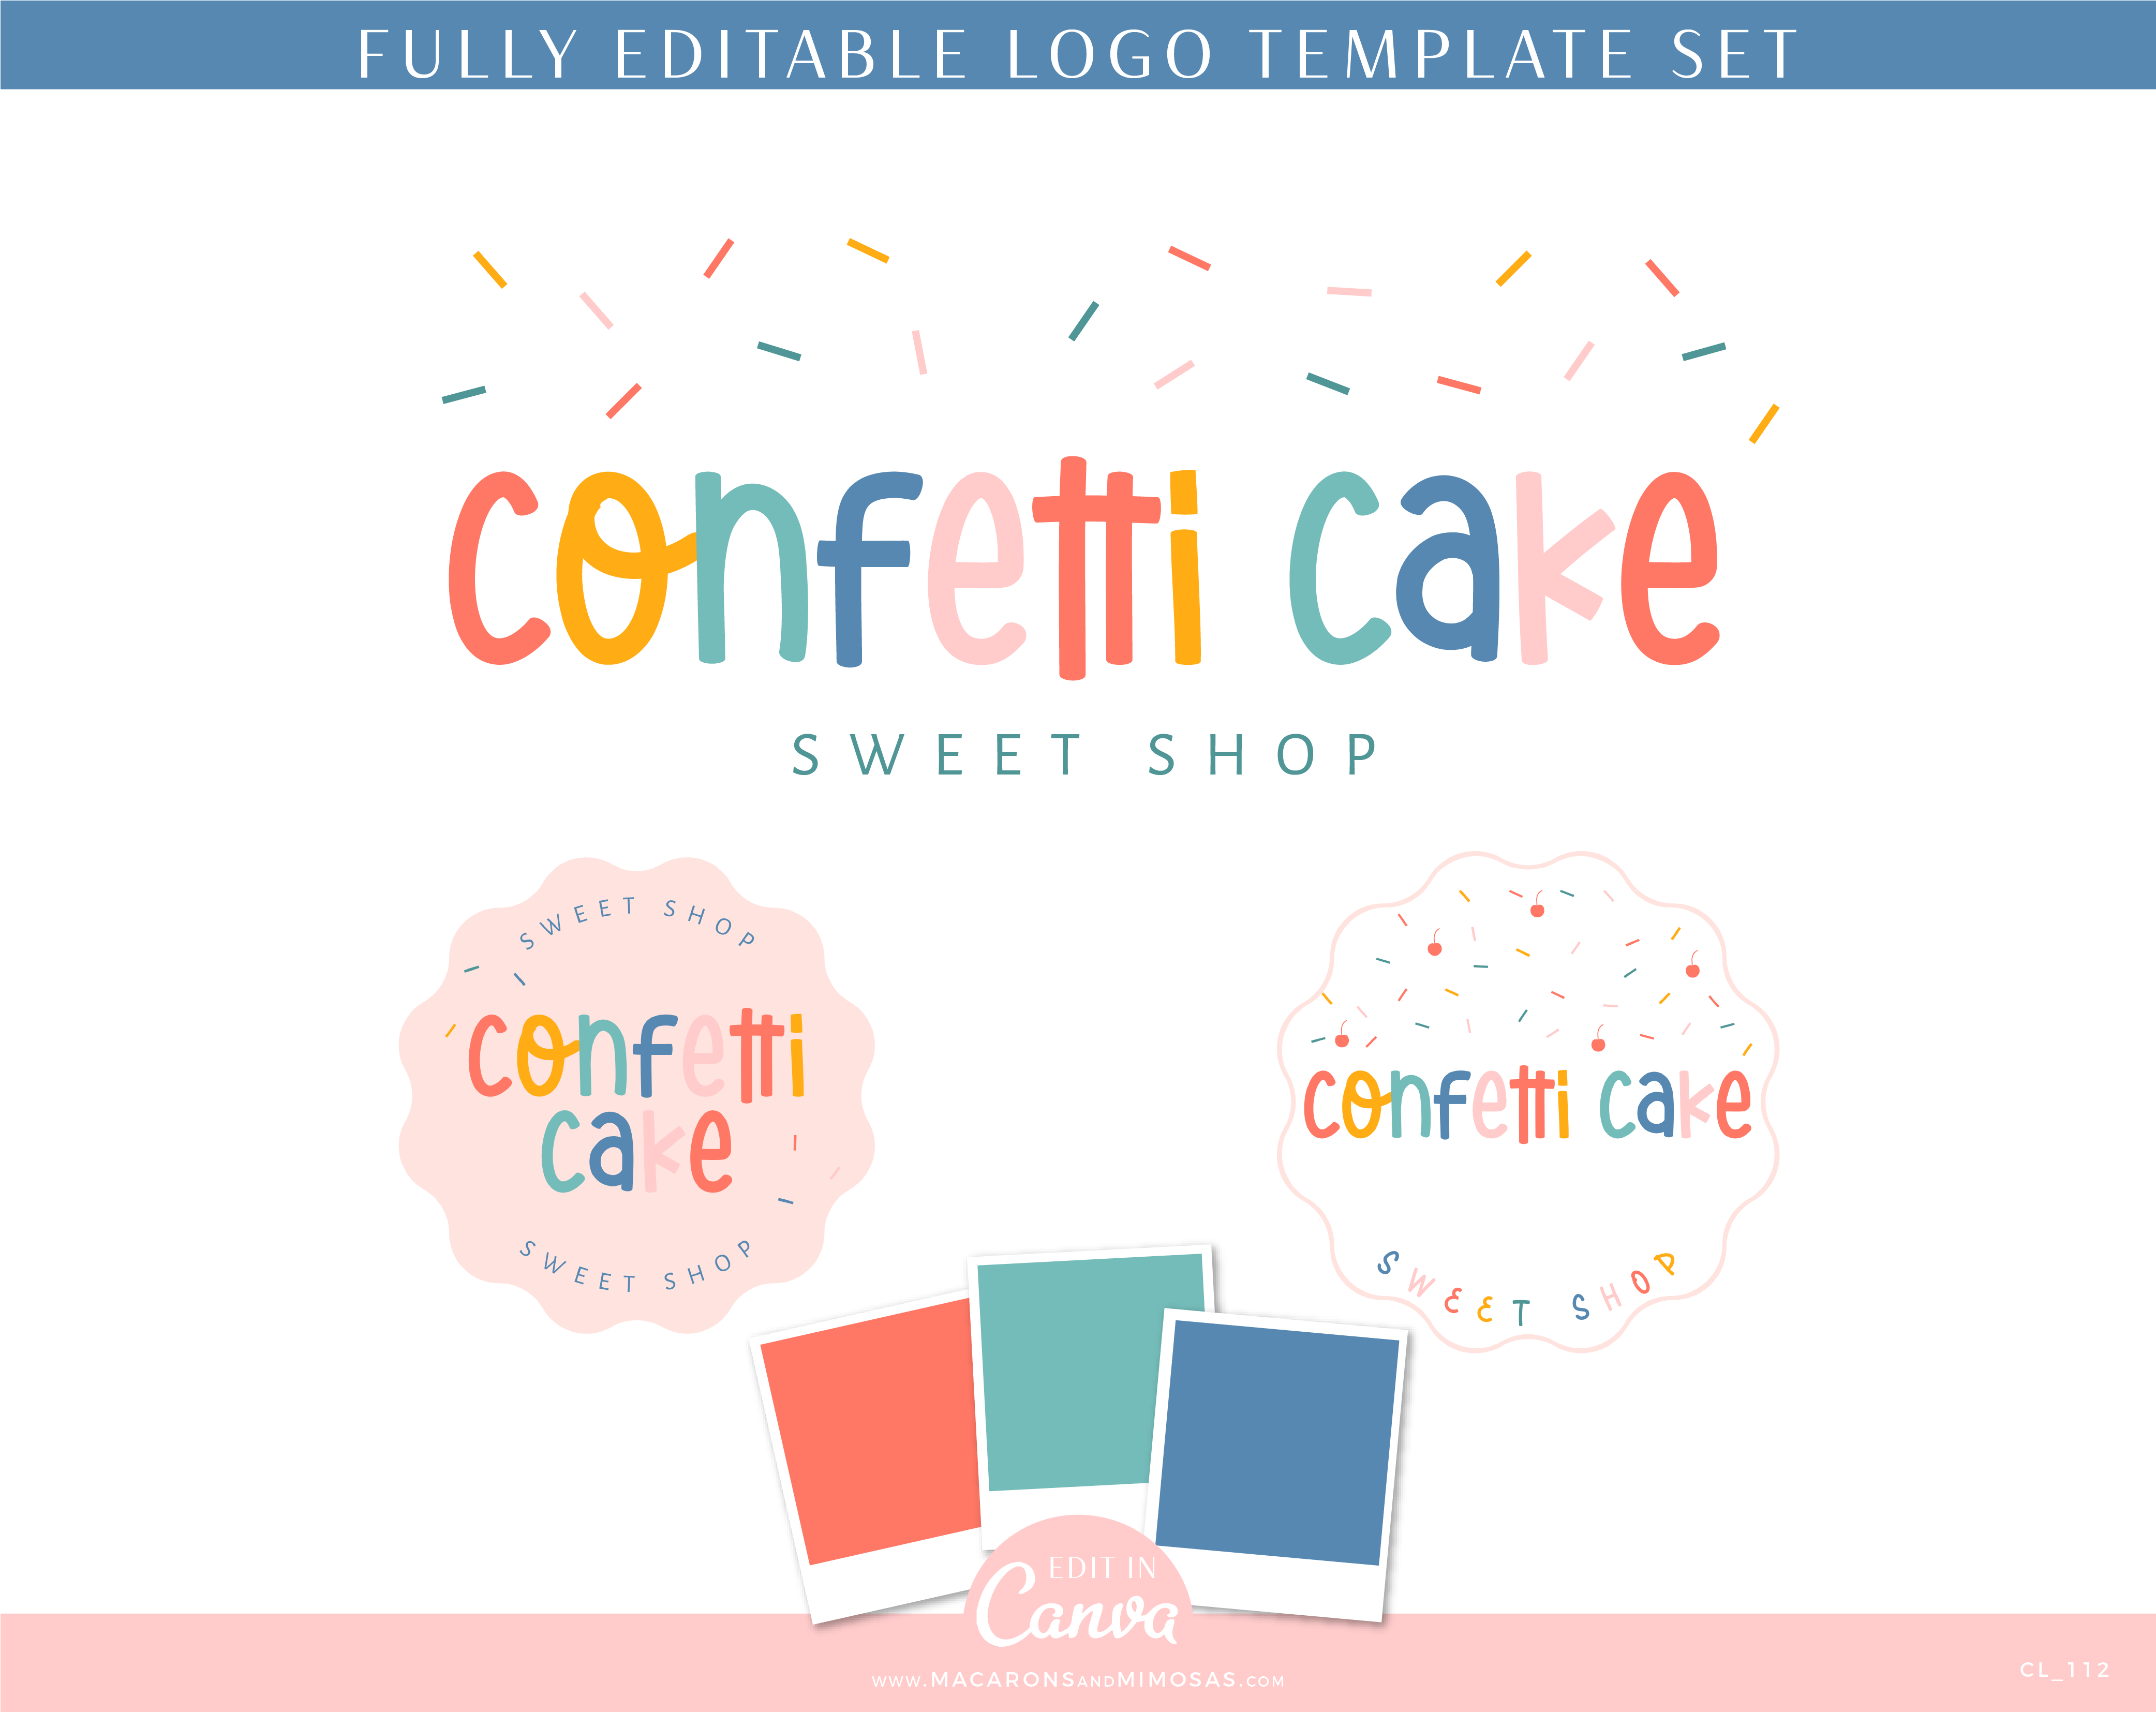 DIY Sprinkles font Logo Template editable in Canva with free brand board template. Playful fun confetti Cake party logo to style your brand and business professionally.